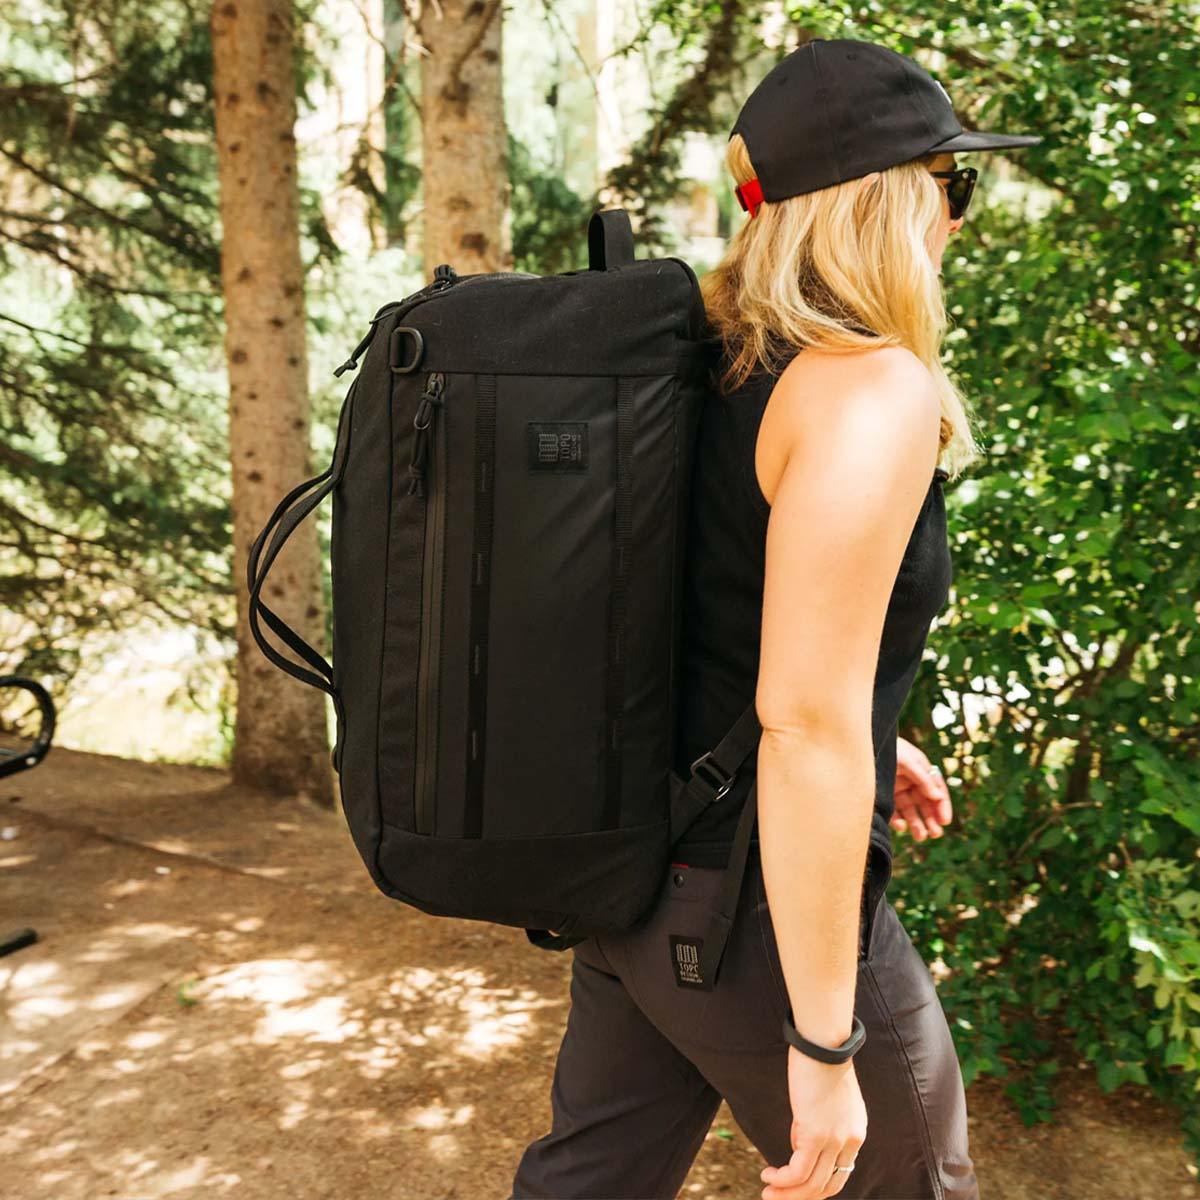 Topo Designs Mountain Duffel 40 Liters, is perfect for weekend trips